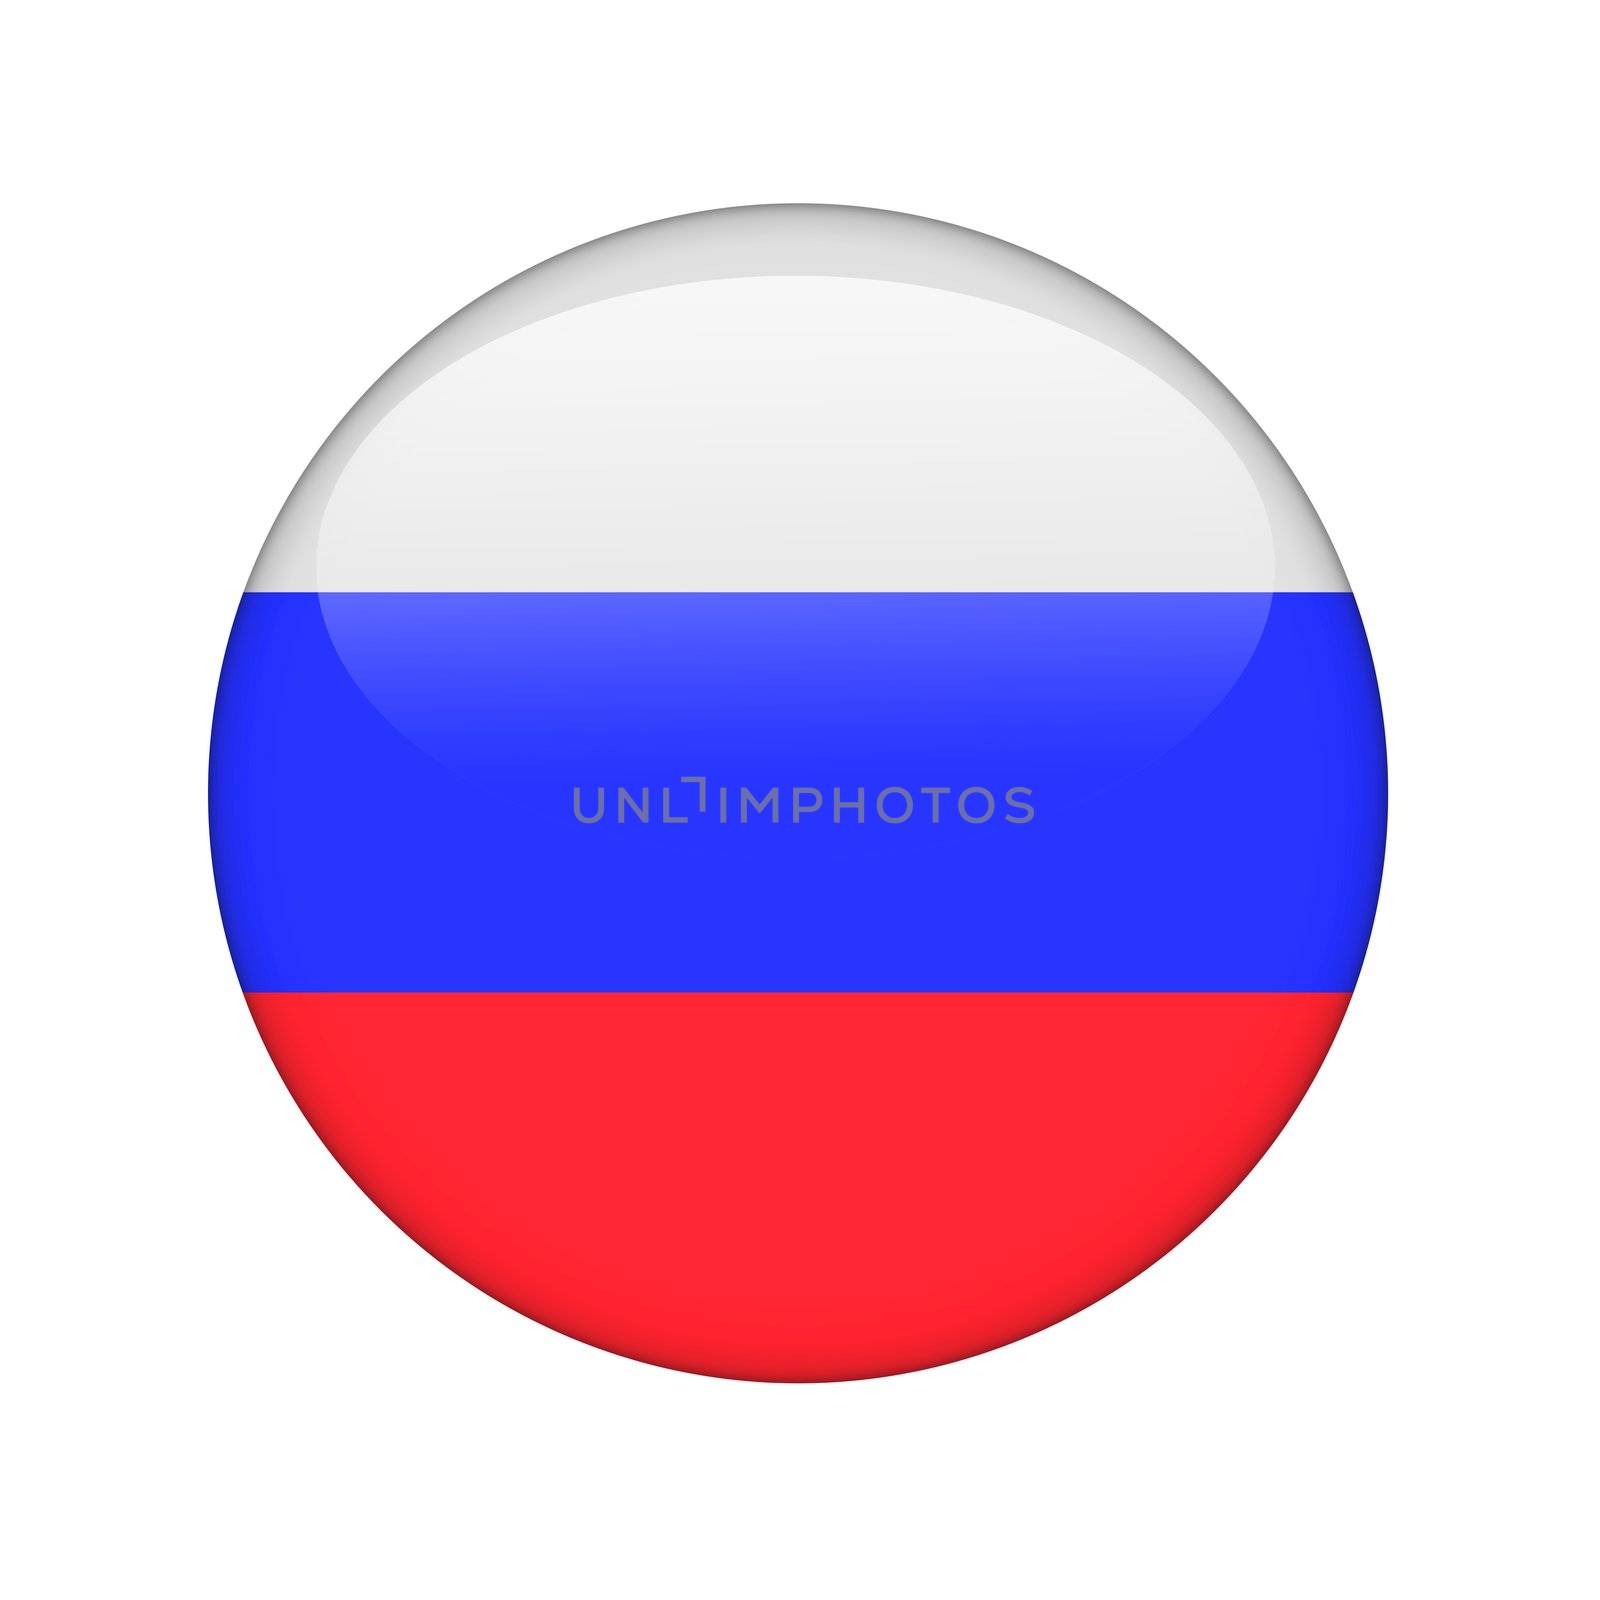 The Russian flag in the form of a glossy icon.